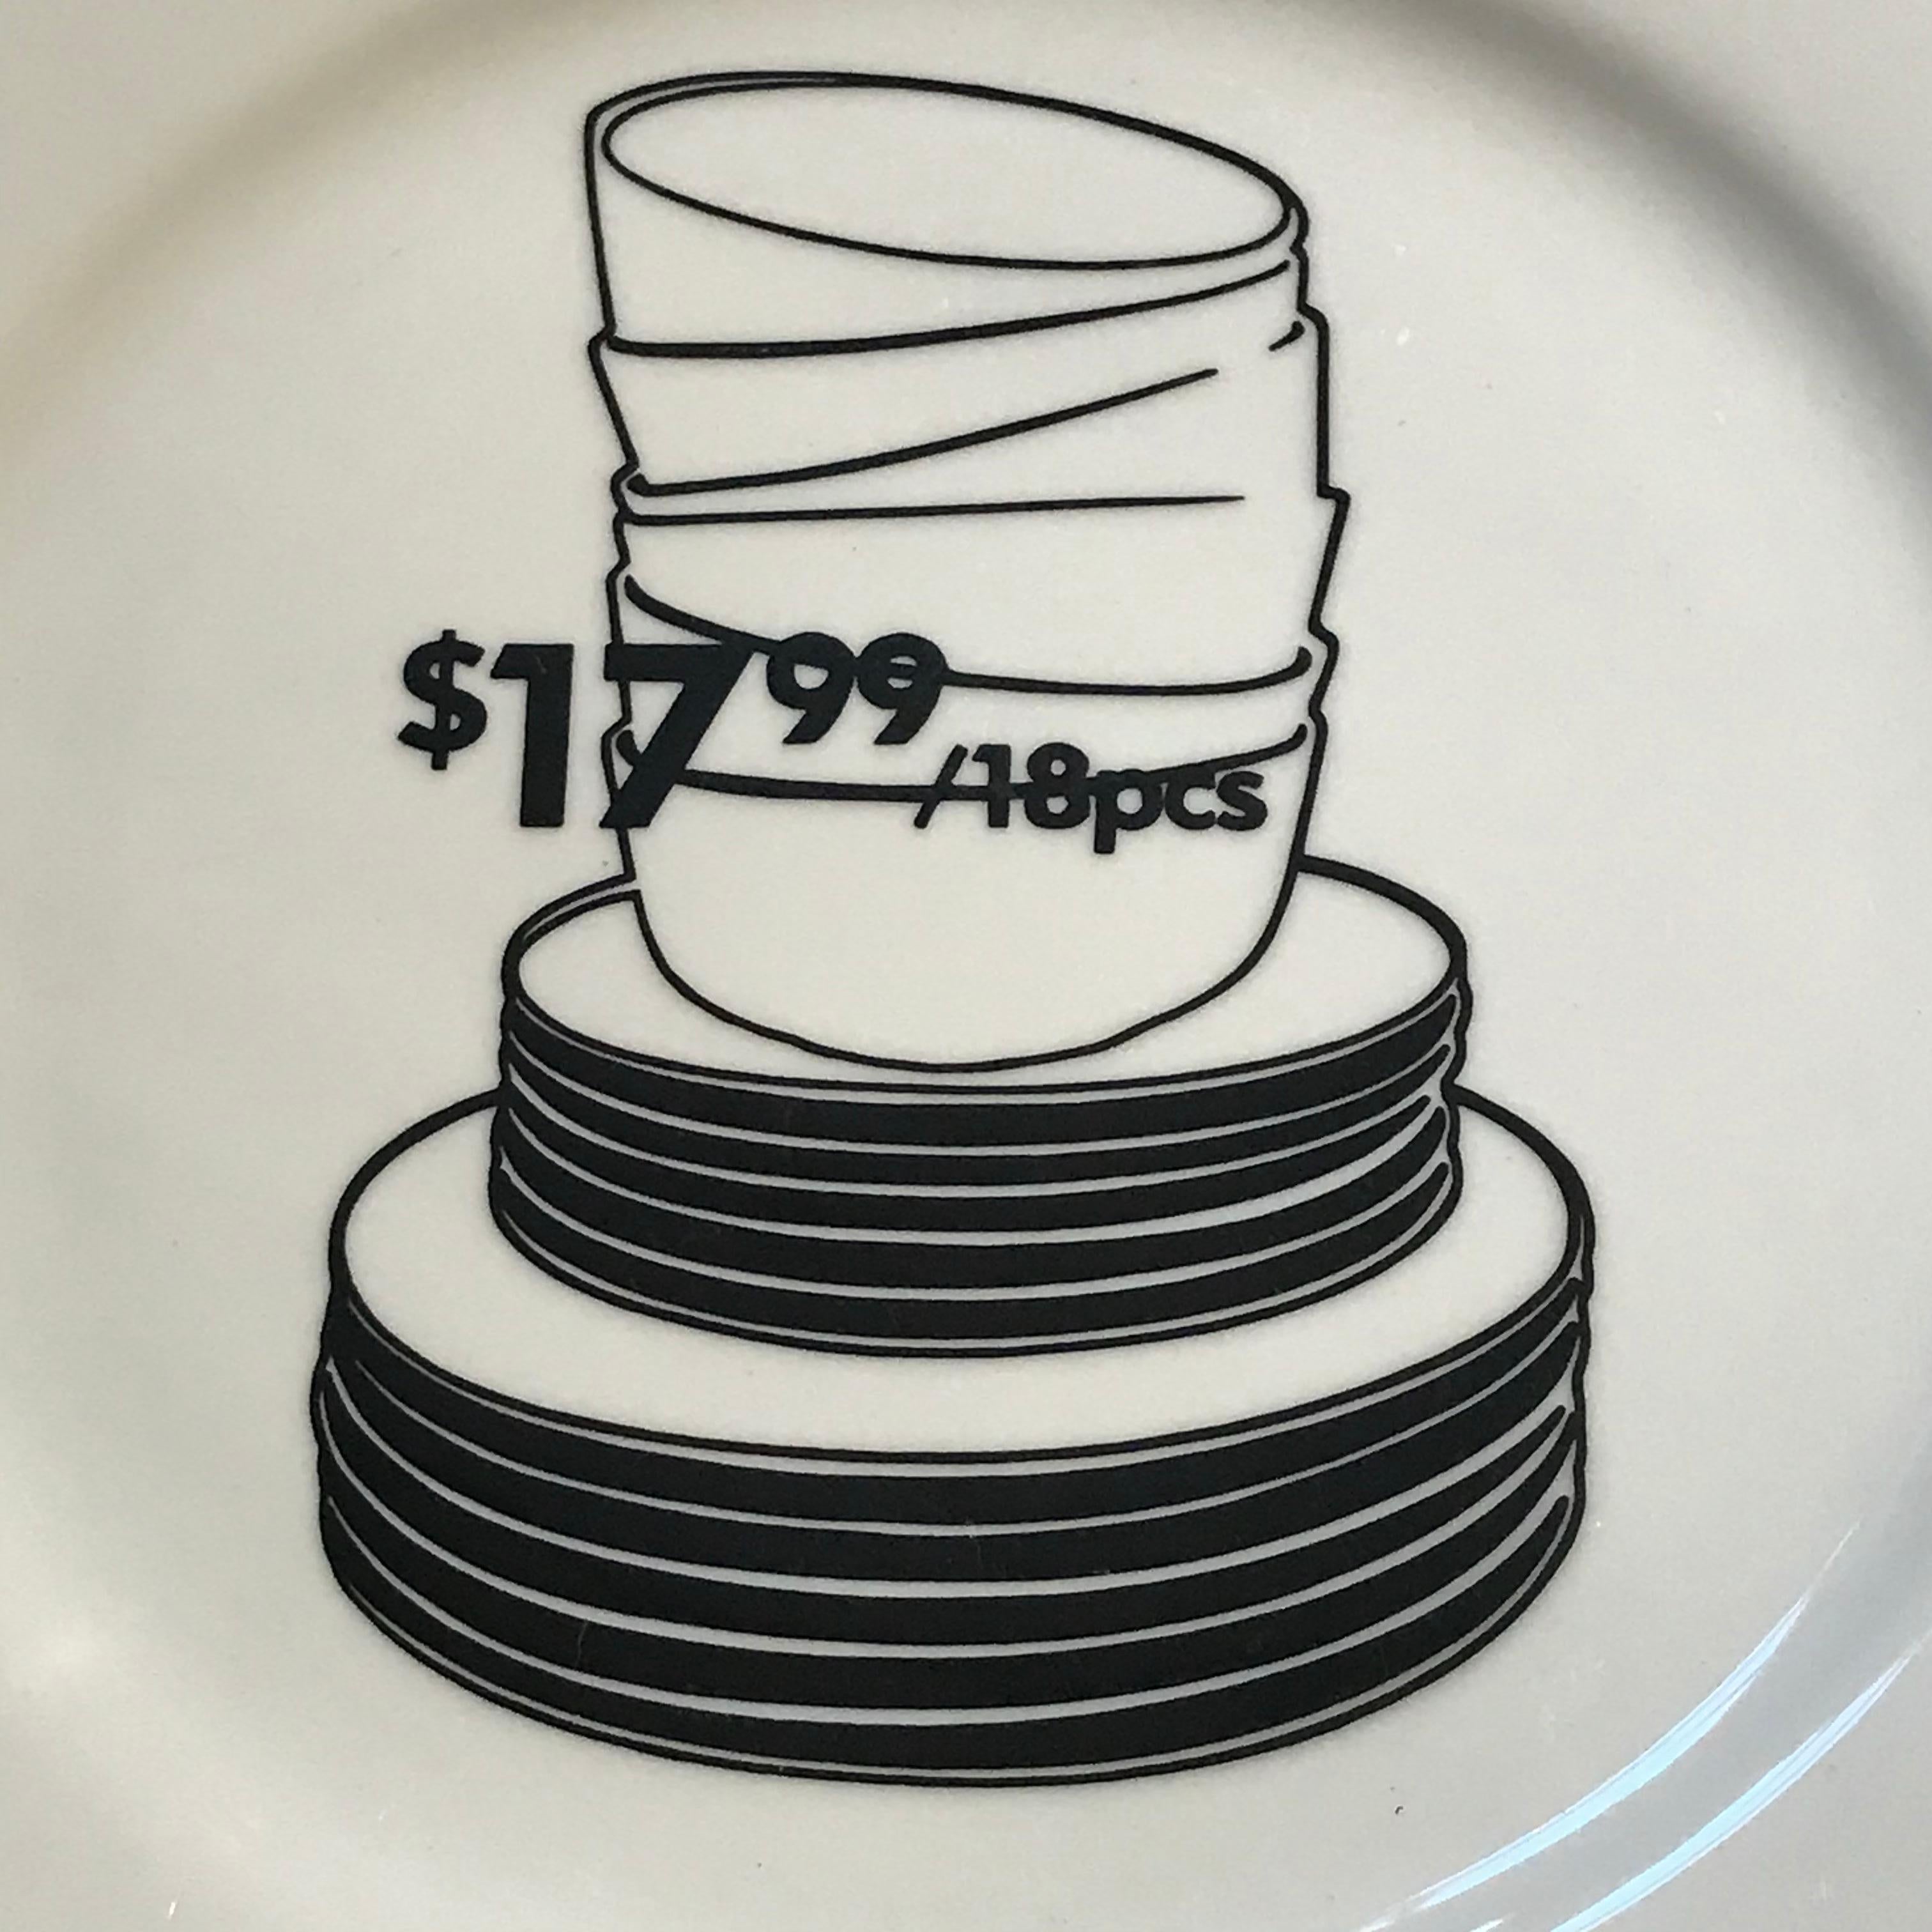 Ceramic plate designed by artist Kota Ezawa. Produced on the occasion of the Santa Monica Museum of Art’s 20th anniversary. Edition of 125 Plate signed; numbered and stamped with artist signature and SMMOA 20th Anniversary stamp to the verso.